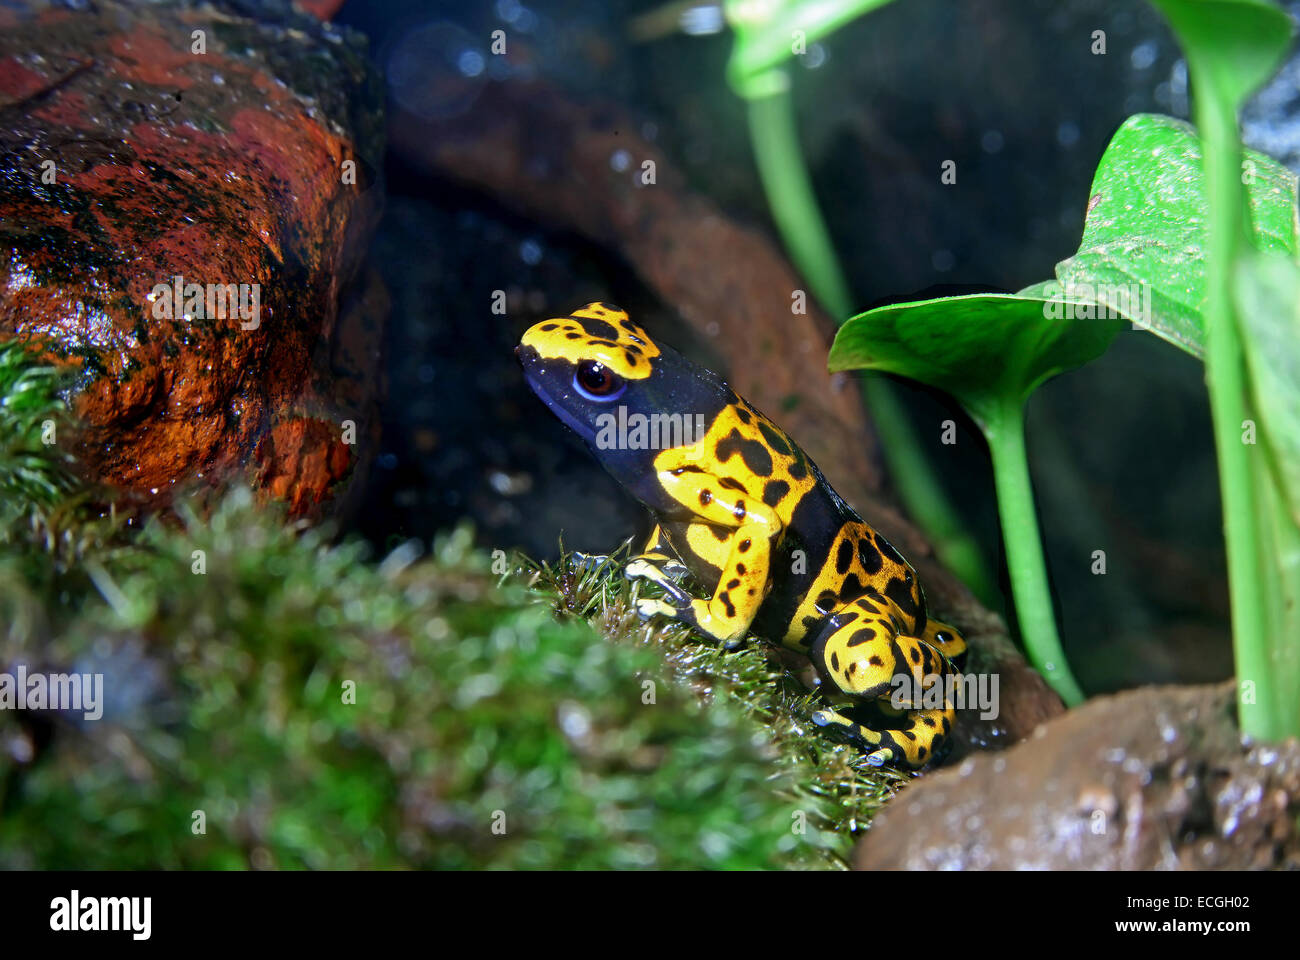 Yellow-banded poison dart frog (Dendrobates leucomelas) with aposematic coloration Stock Photo